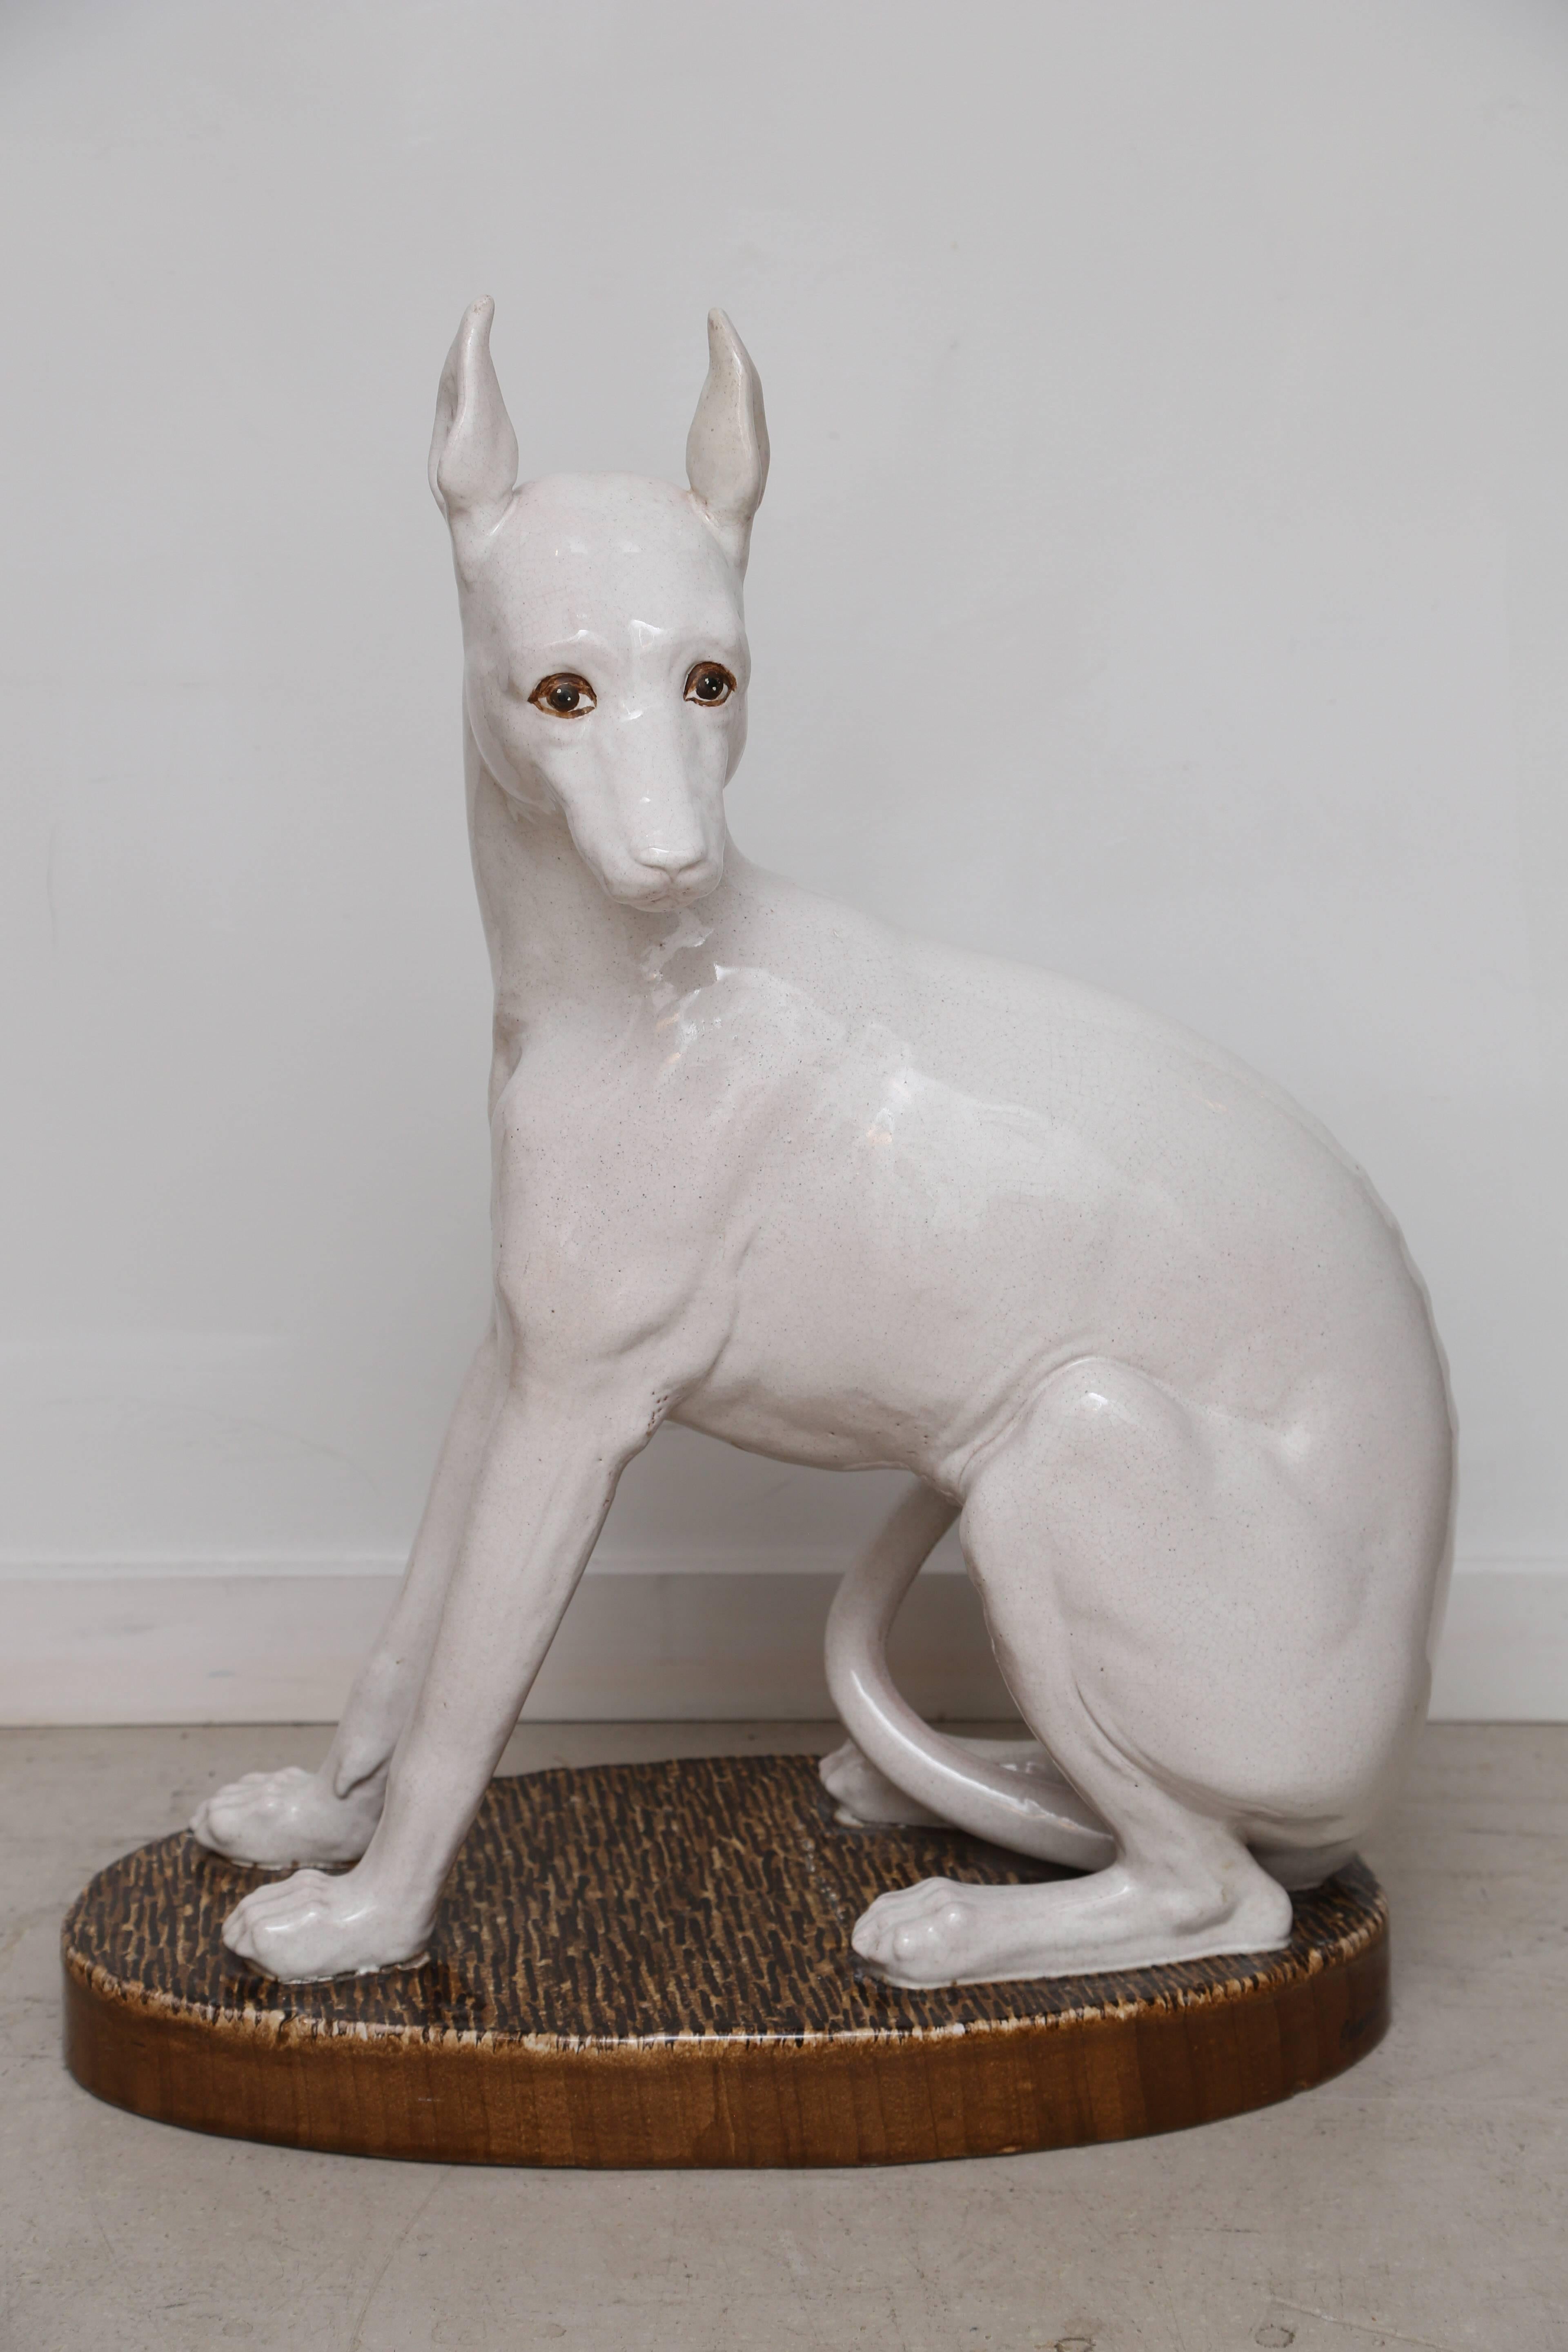 Vintage white whippet statue signed Italy on base.